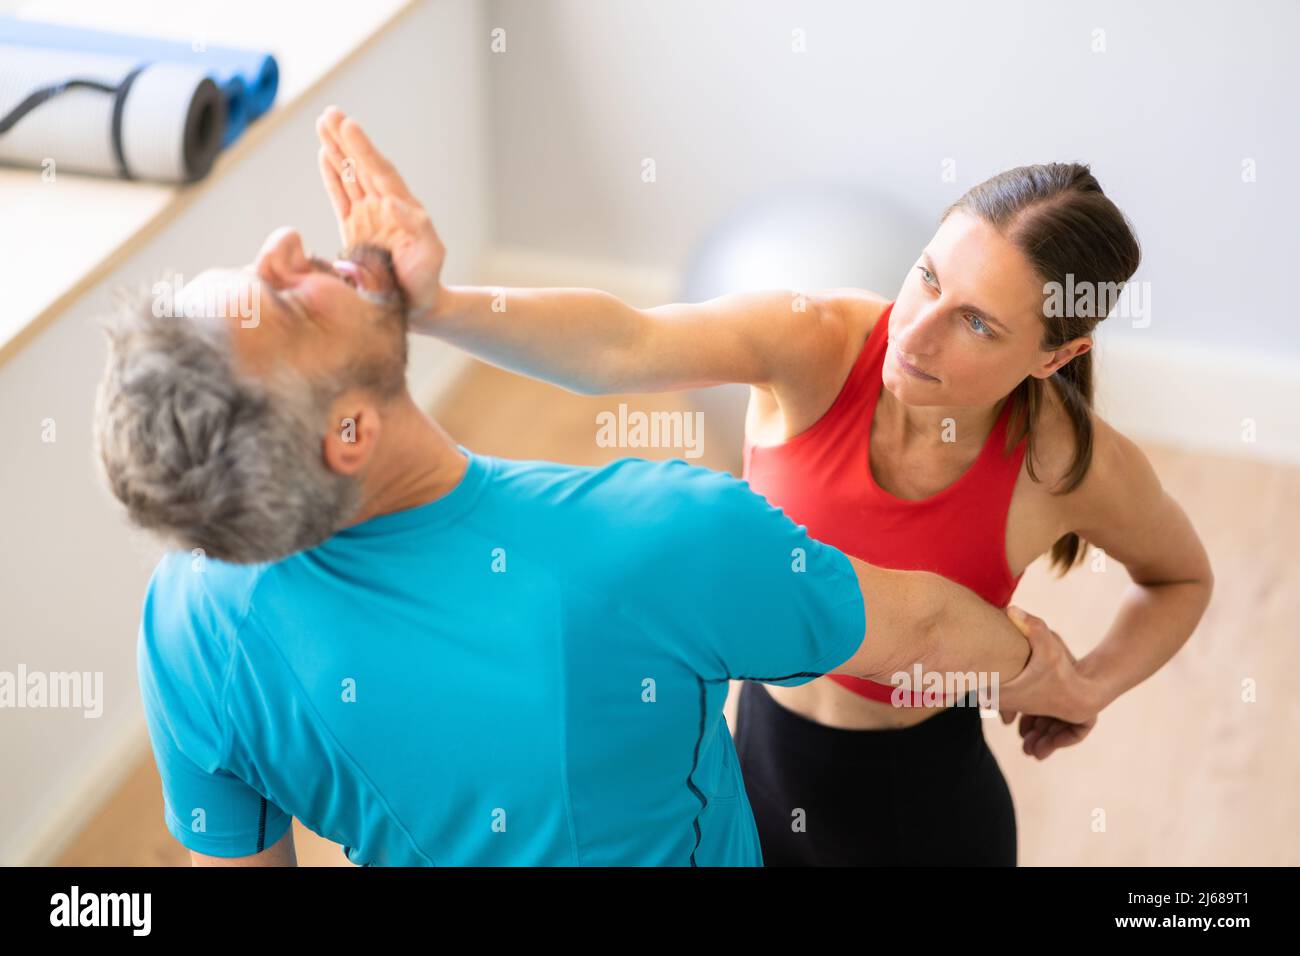 Fight Sparring Fitness Training In Gym. Female Power And Self Defense Stock Photo